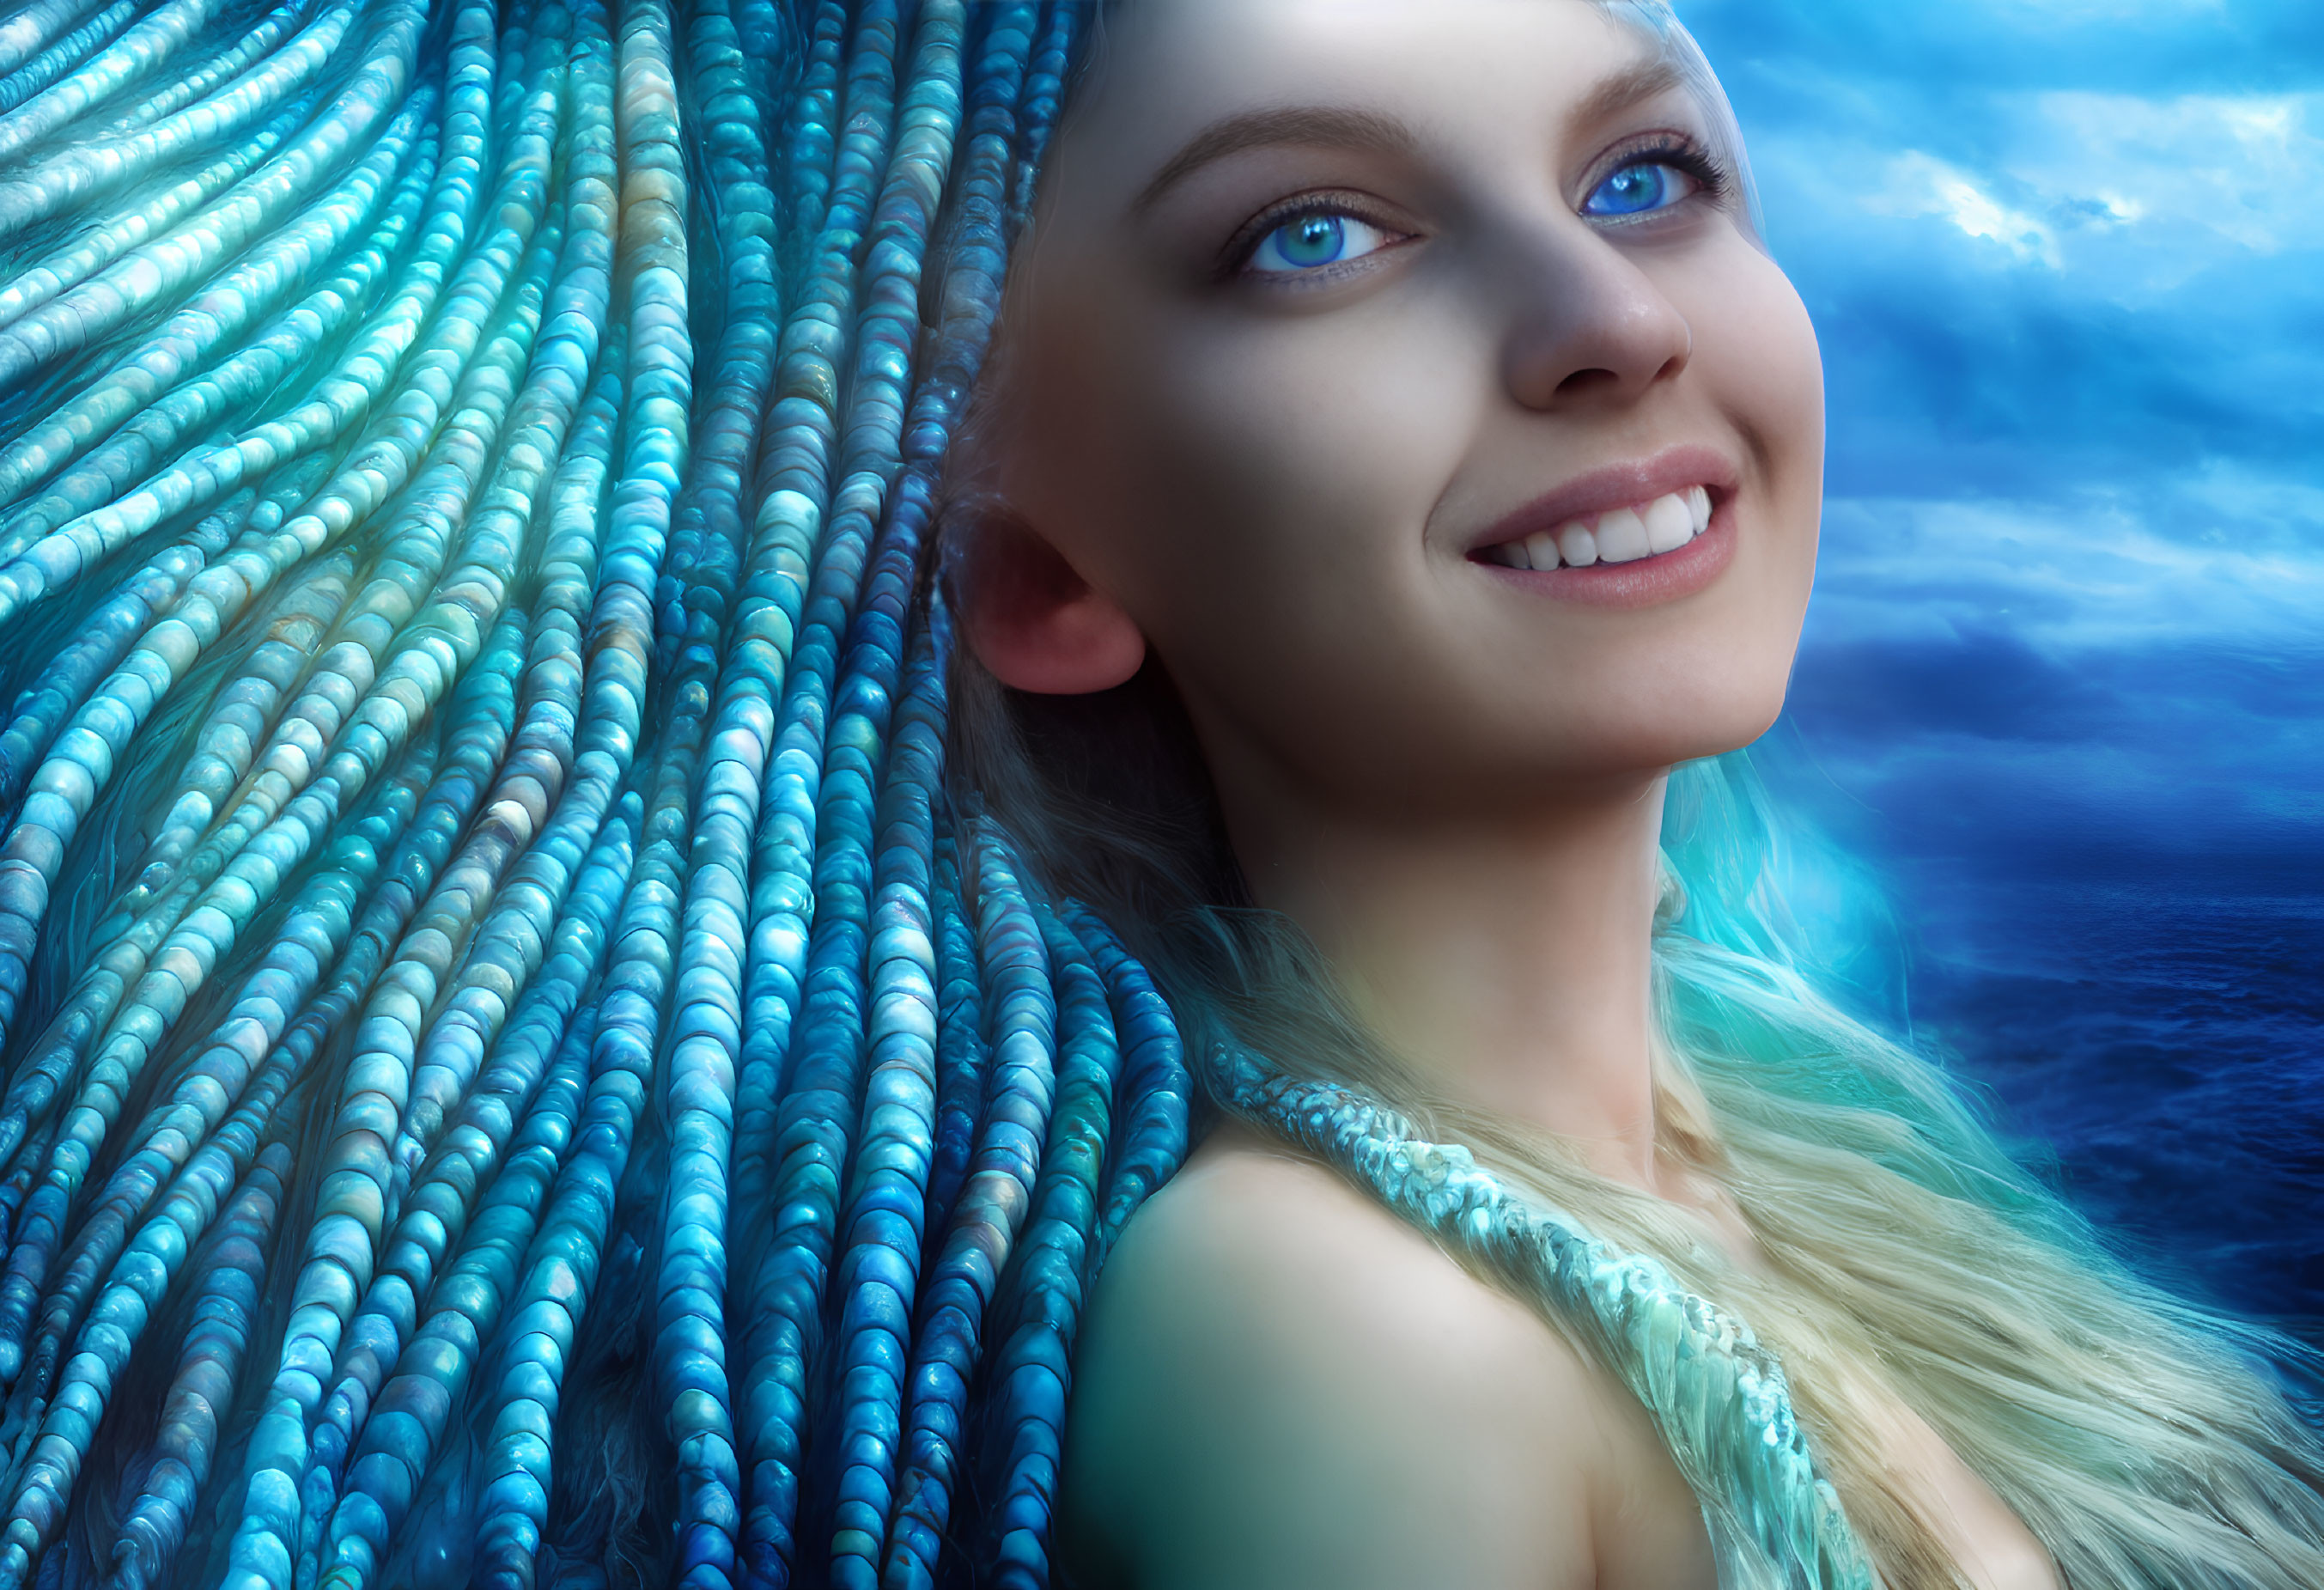 Blue-eyed woman with intricate braided blue hair in serene ocean setting